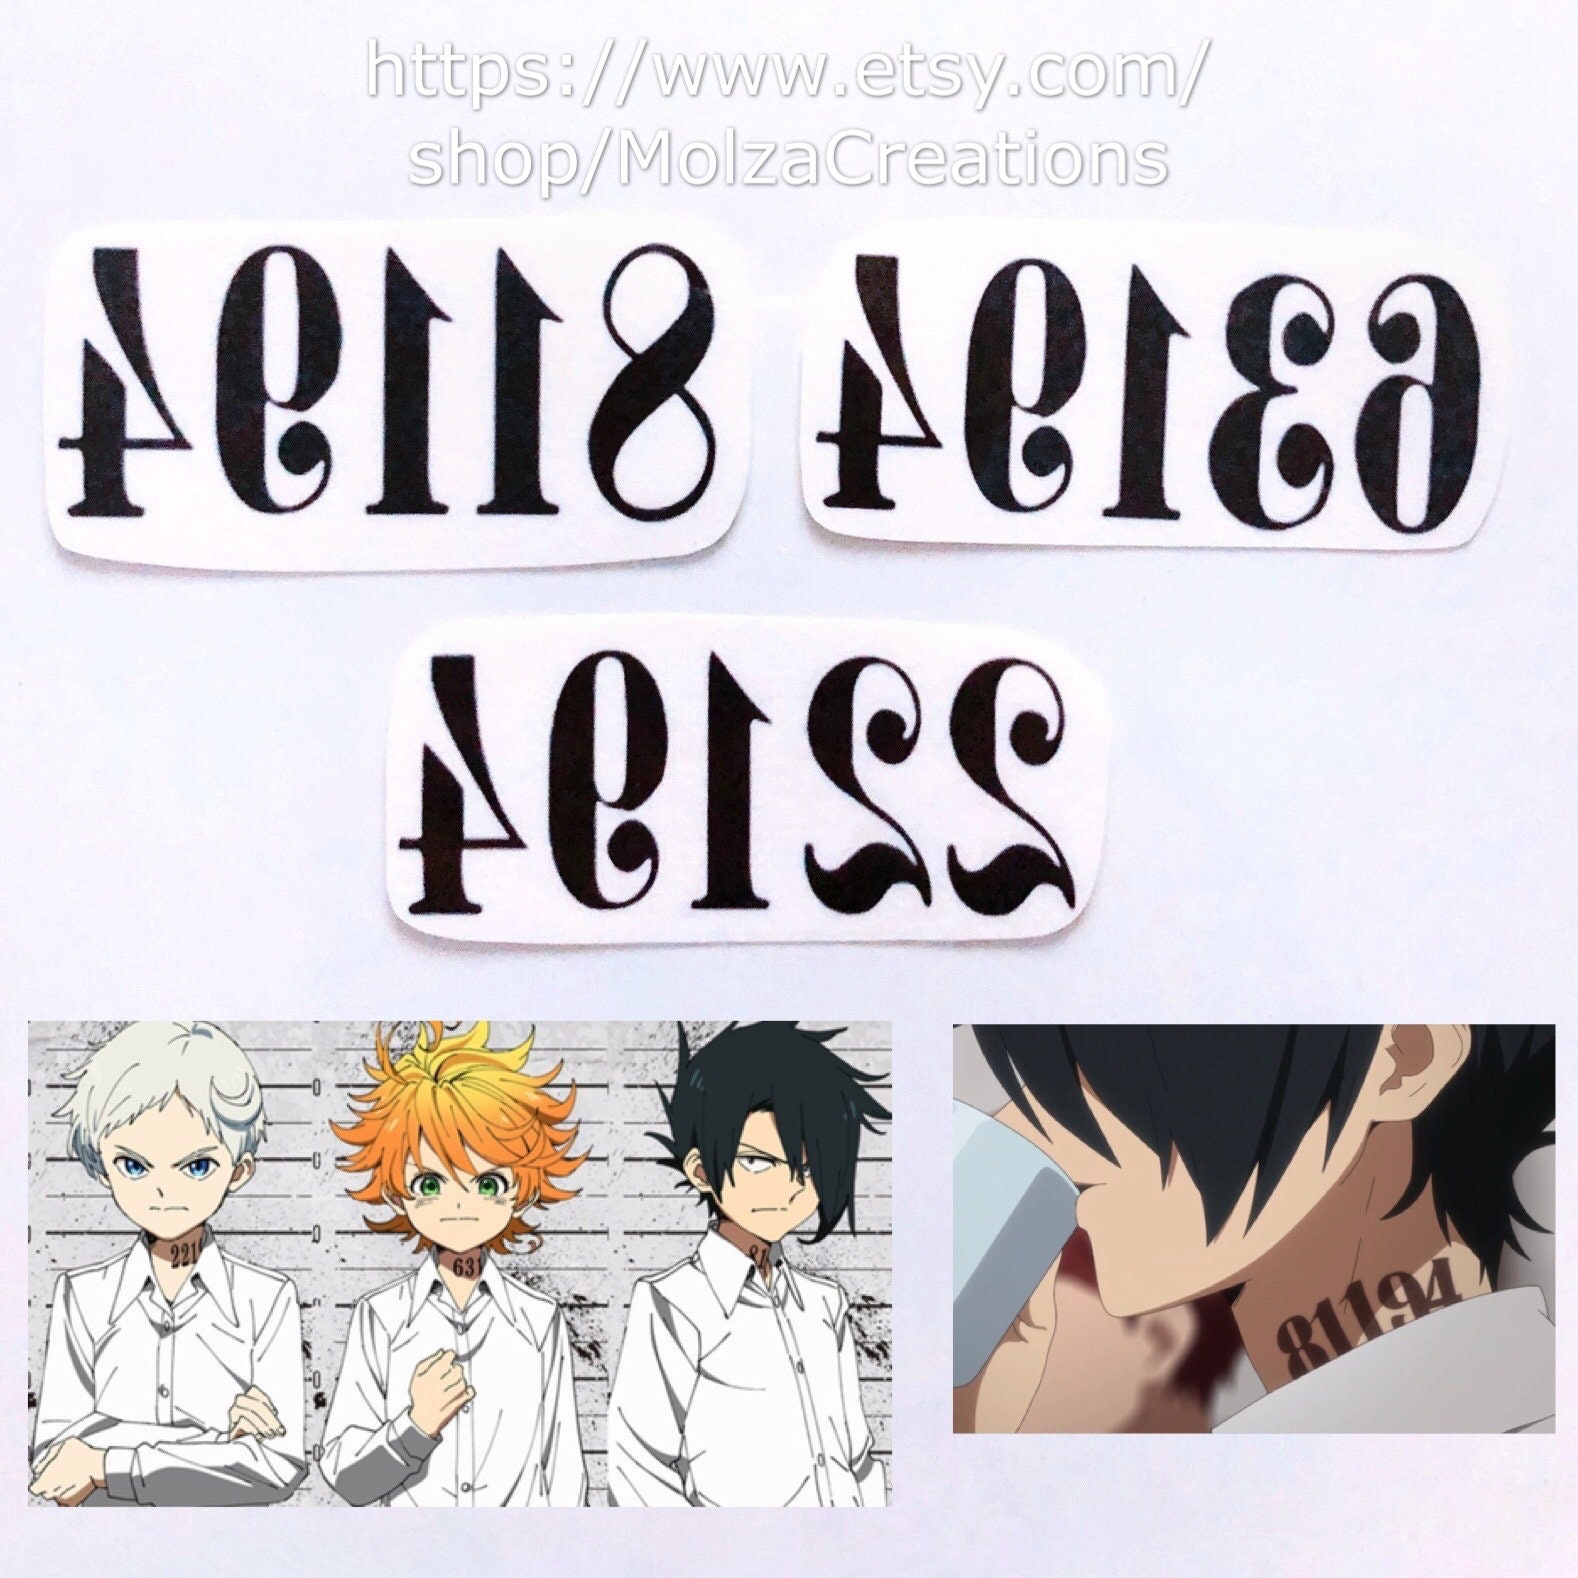 The promised neverland Emma Norman Ray | iPad Case & Skin